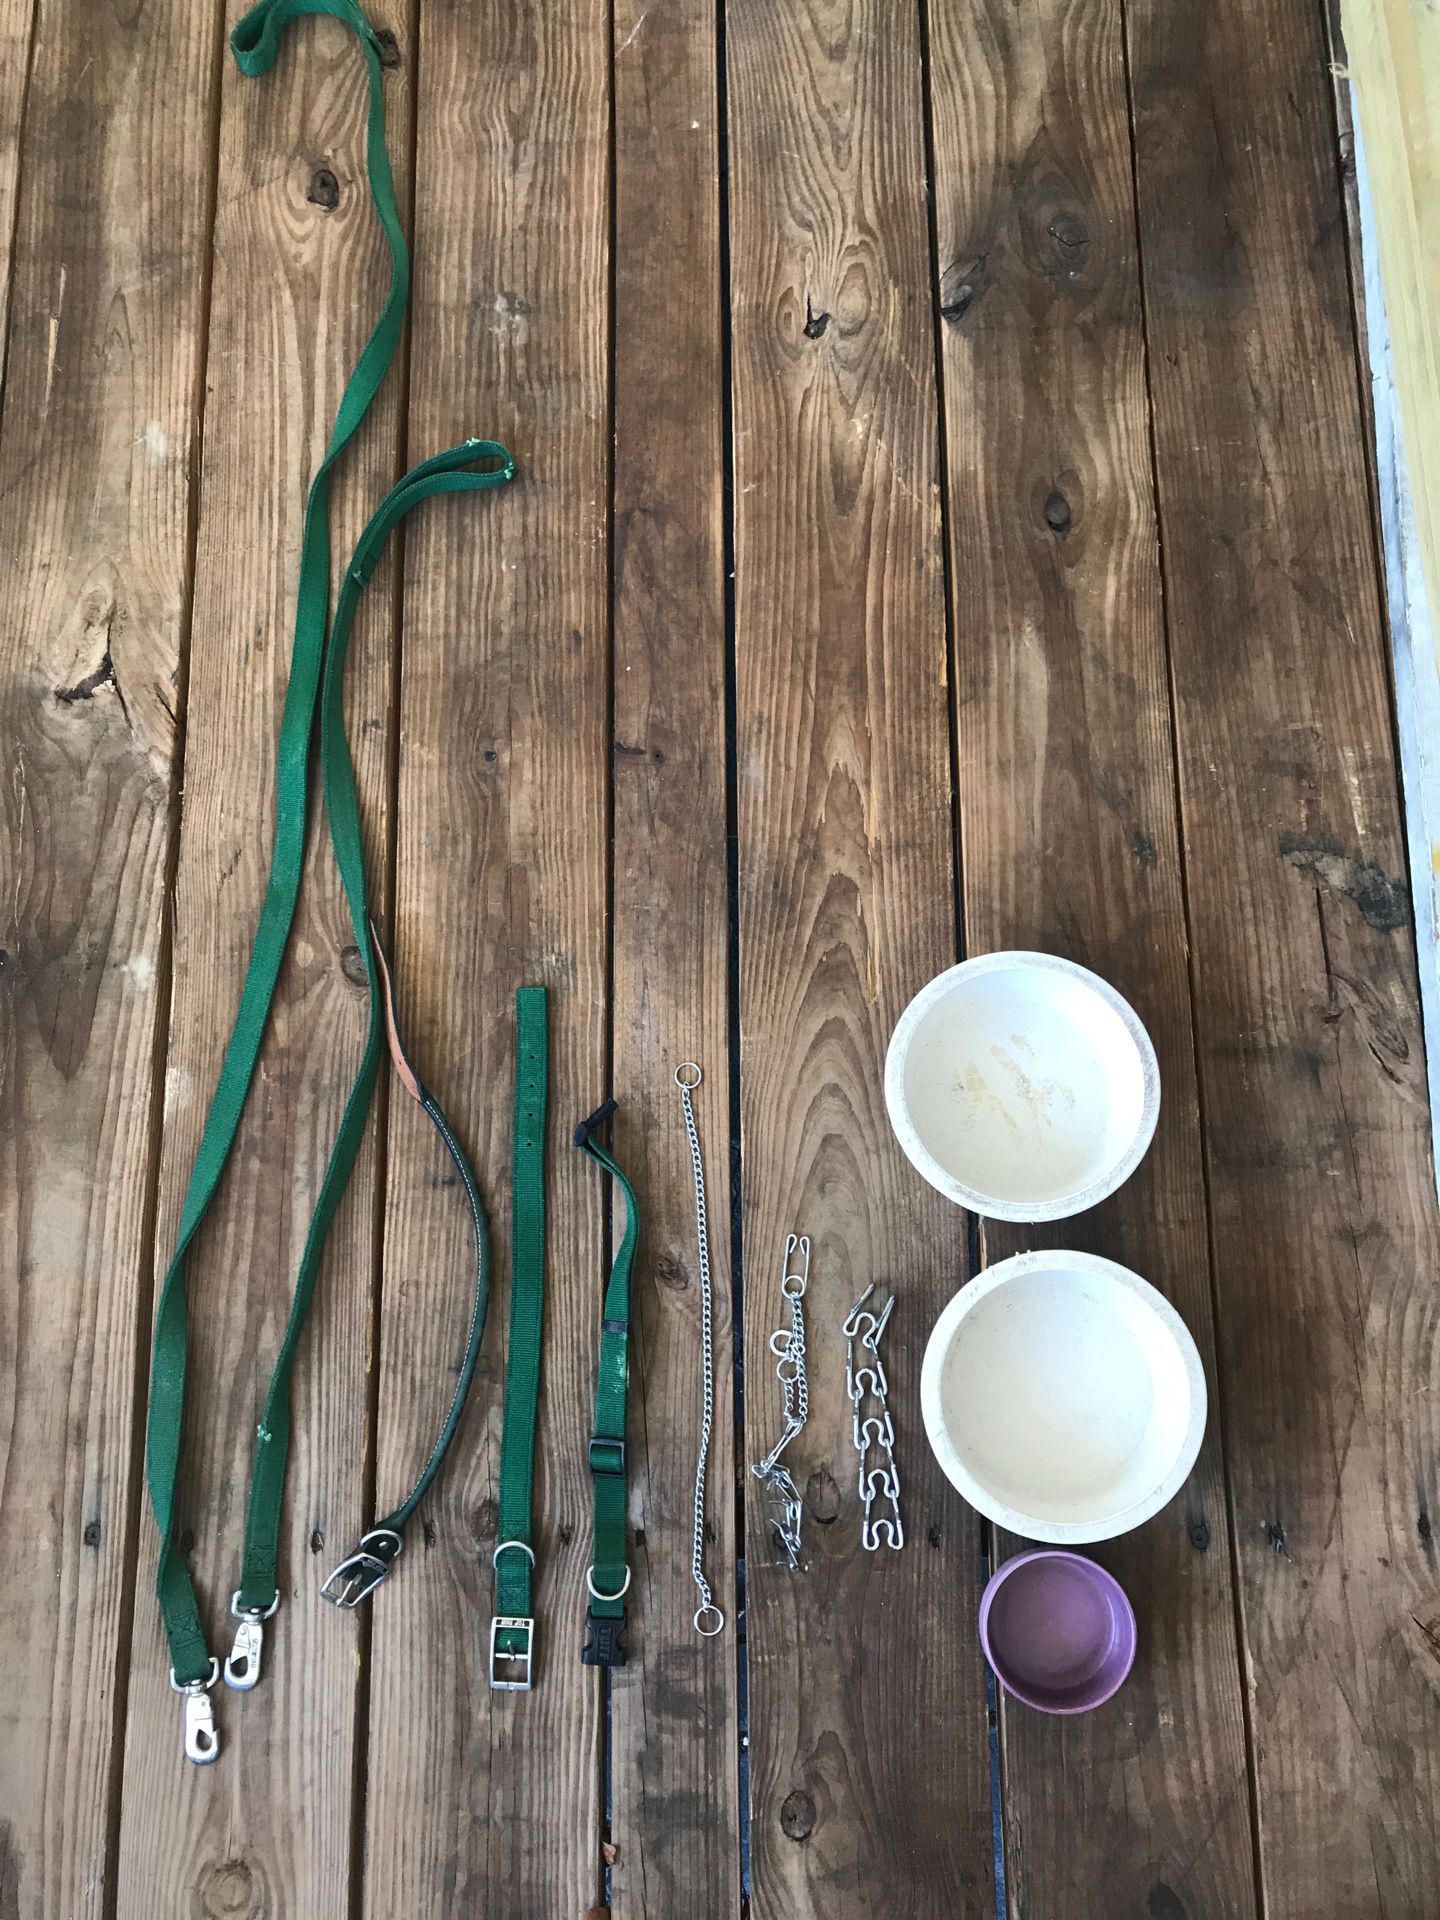 Dog collars, leashes and bowls